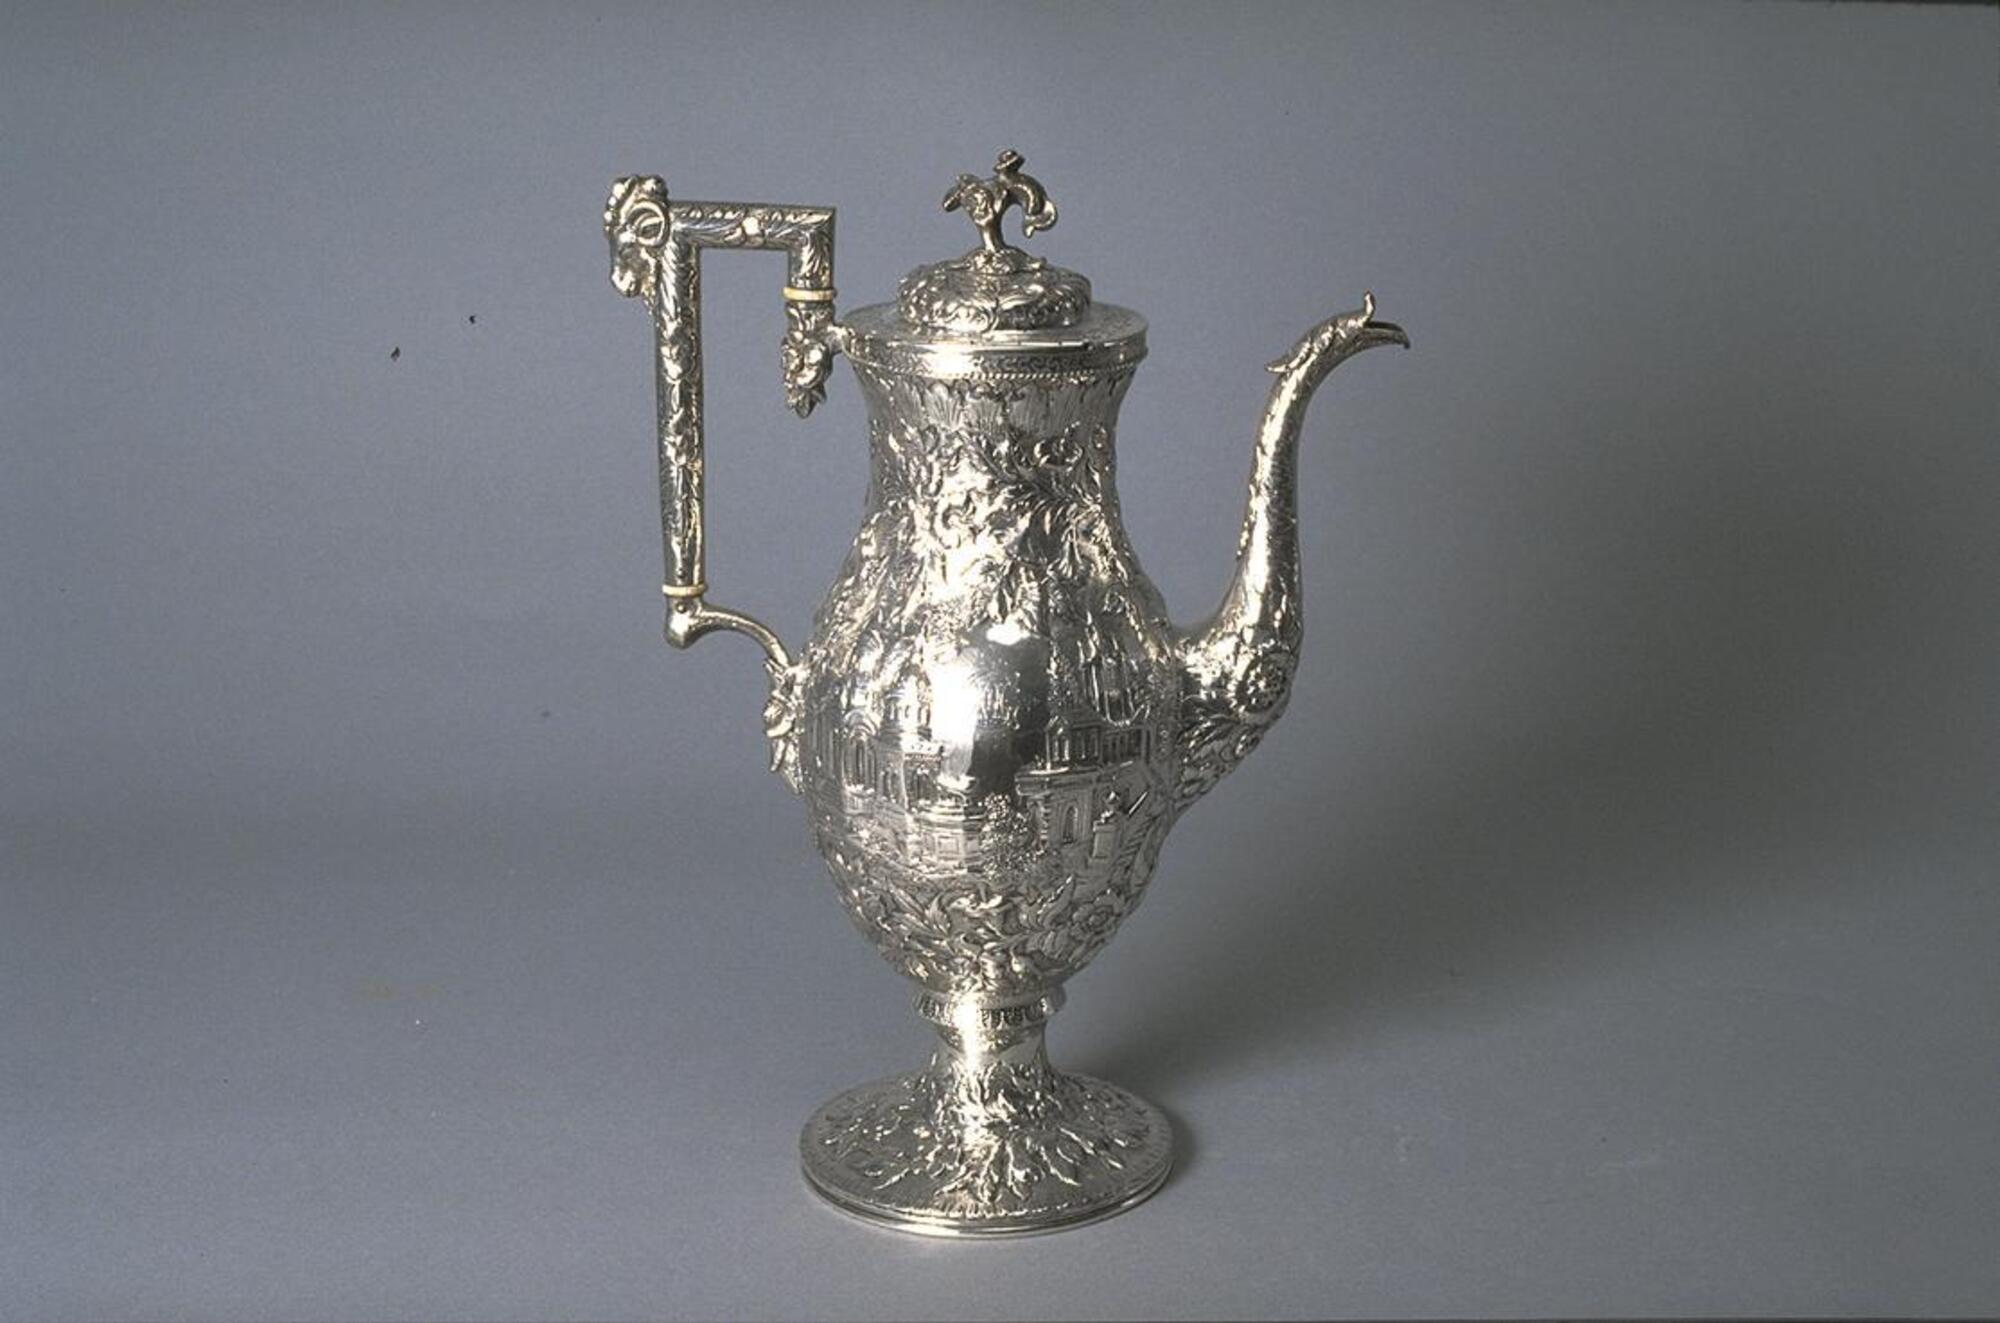 Tall, narrow silver pot with long spout, finial-topped lid, square handle and opulent repouss&eacute; decoration